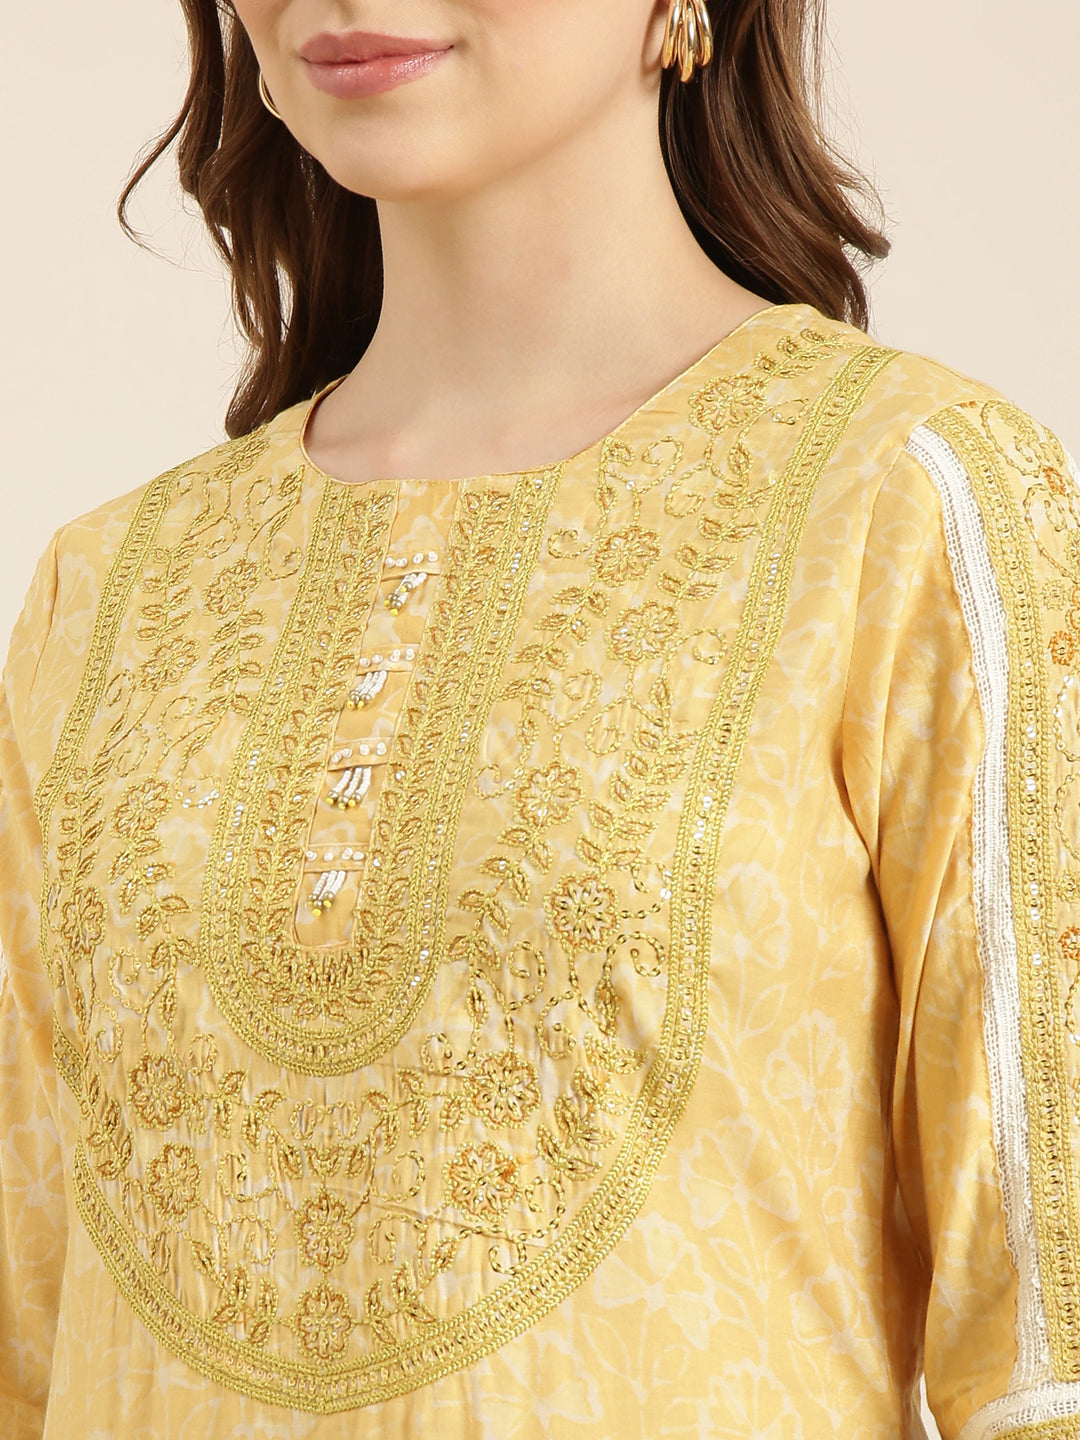 Women Straight Yellow Floral Kurti and Palazzos Set Comes With Dupatta